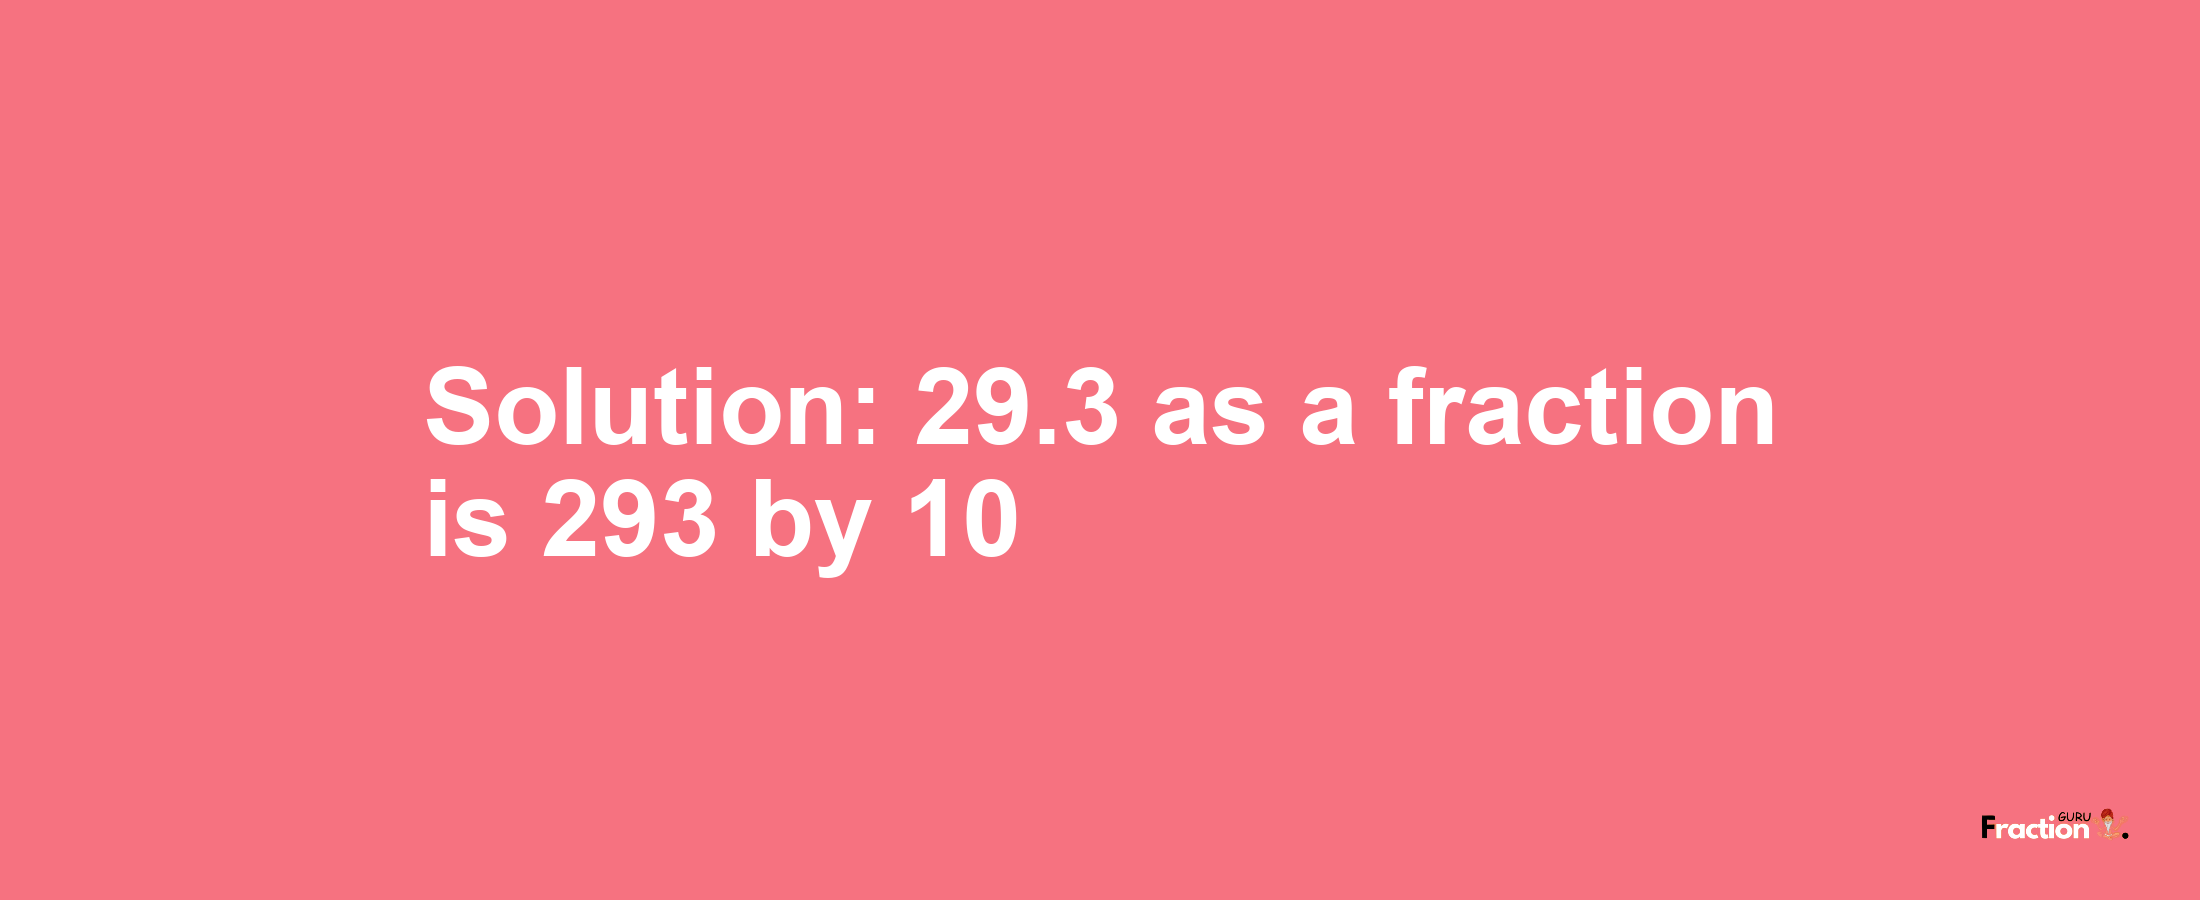 Solution:29.3 as a fraction is 293/10